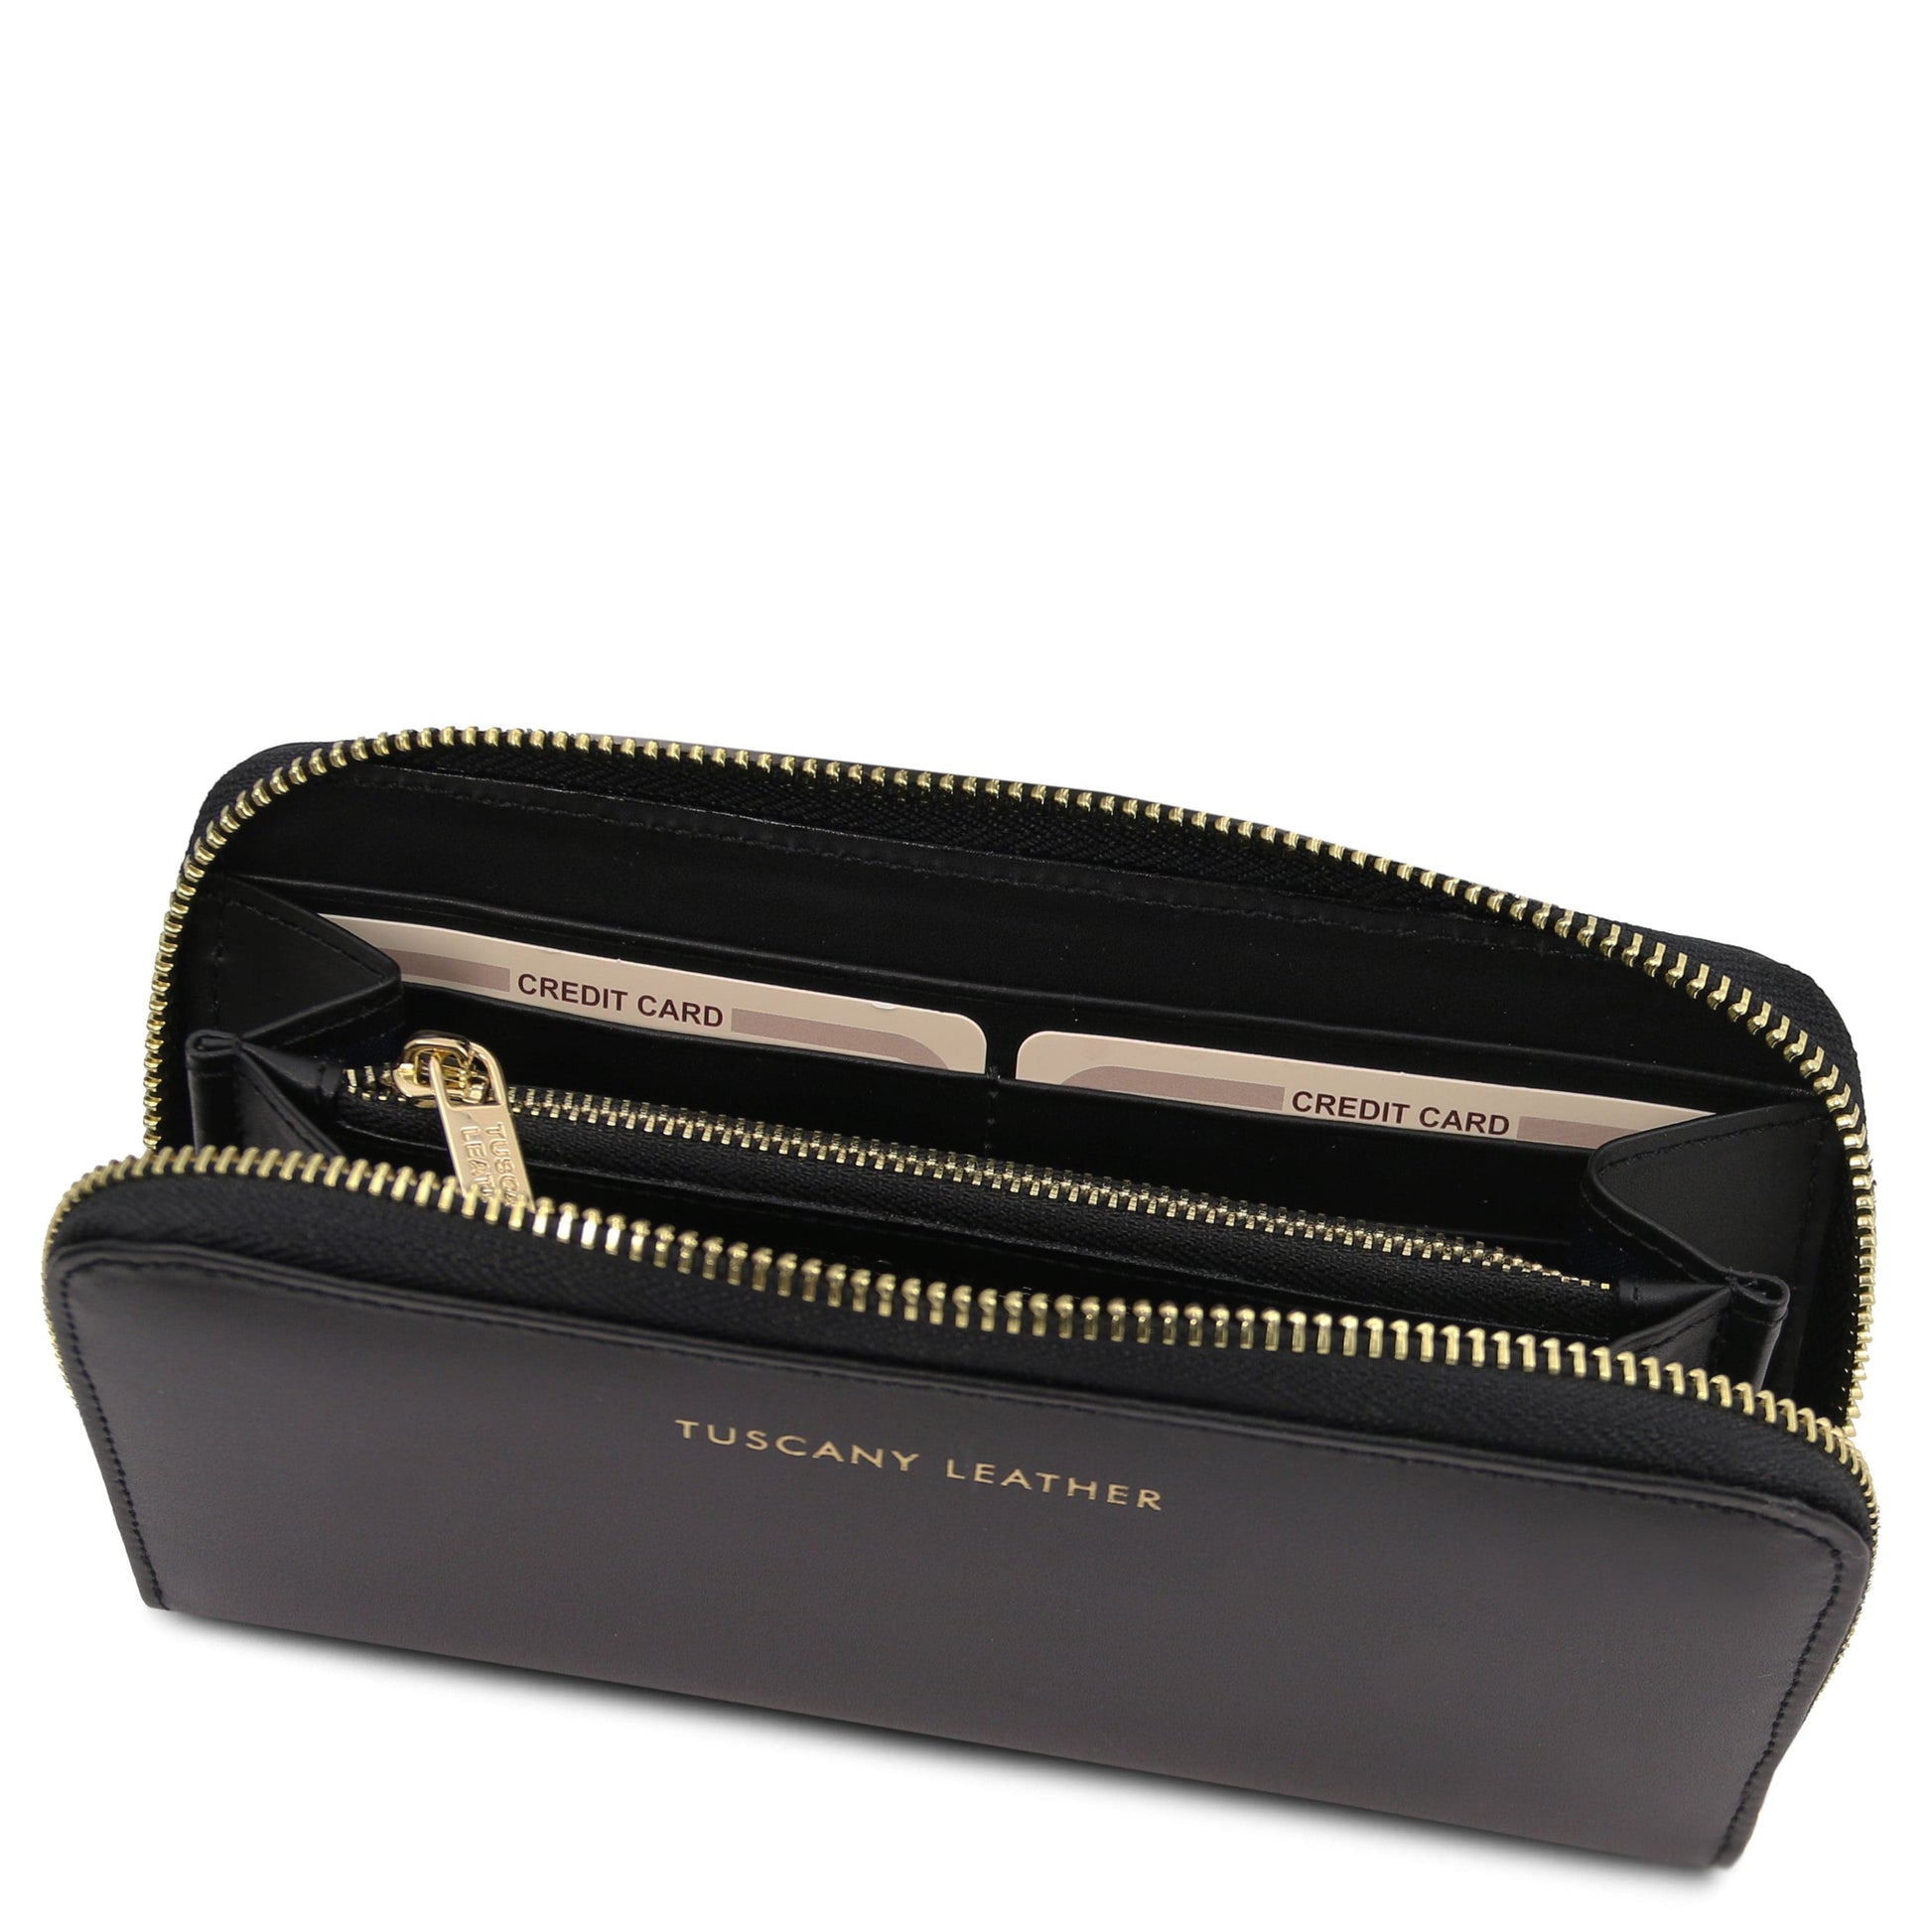 Venere - Exclusive zip around leather wallet | TL142085 - Premium Leather wallets for women - Shop now at San Rocco Italia